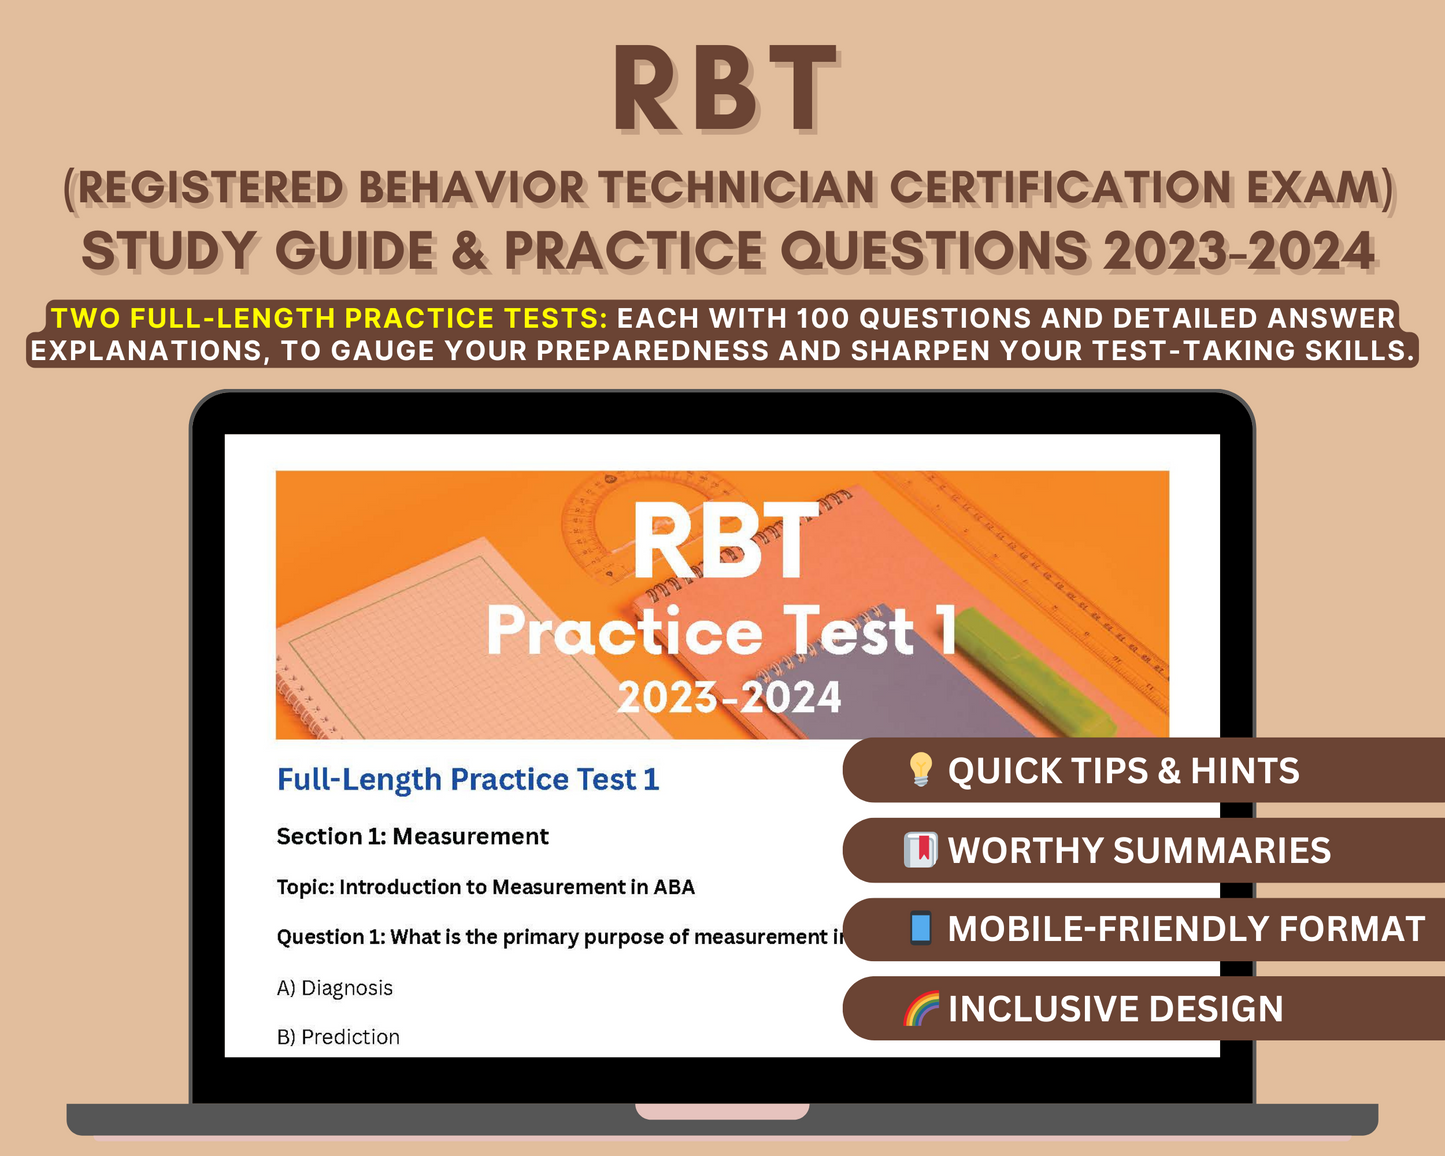 RBT Exam Study Guide 2023-2024: In-Depth Content Review, Practice Tests & Exam Strategies for Applied Behavior Analysis